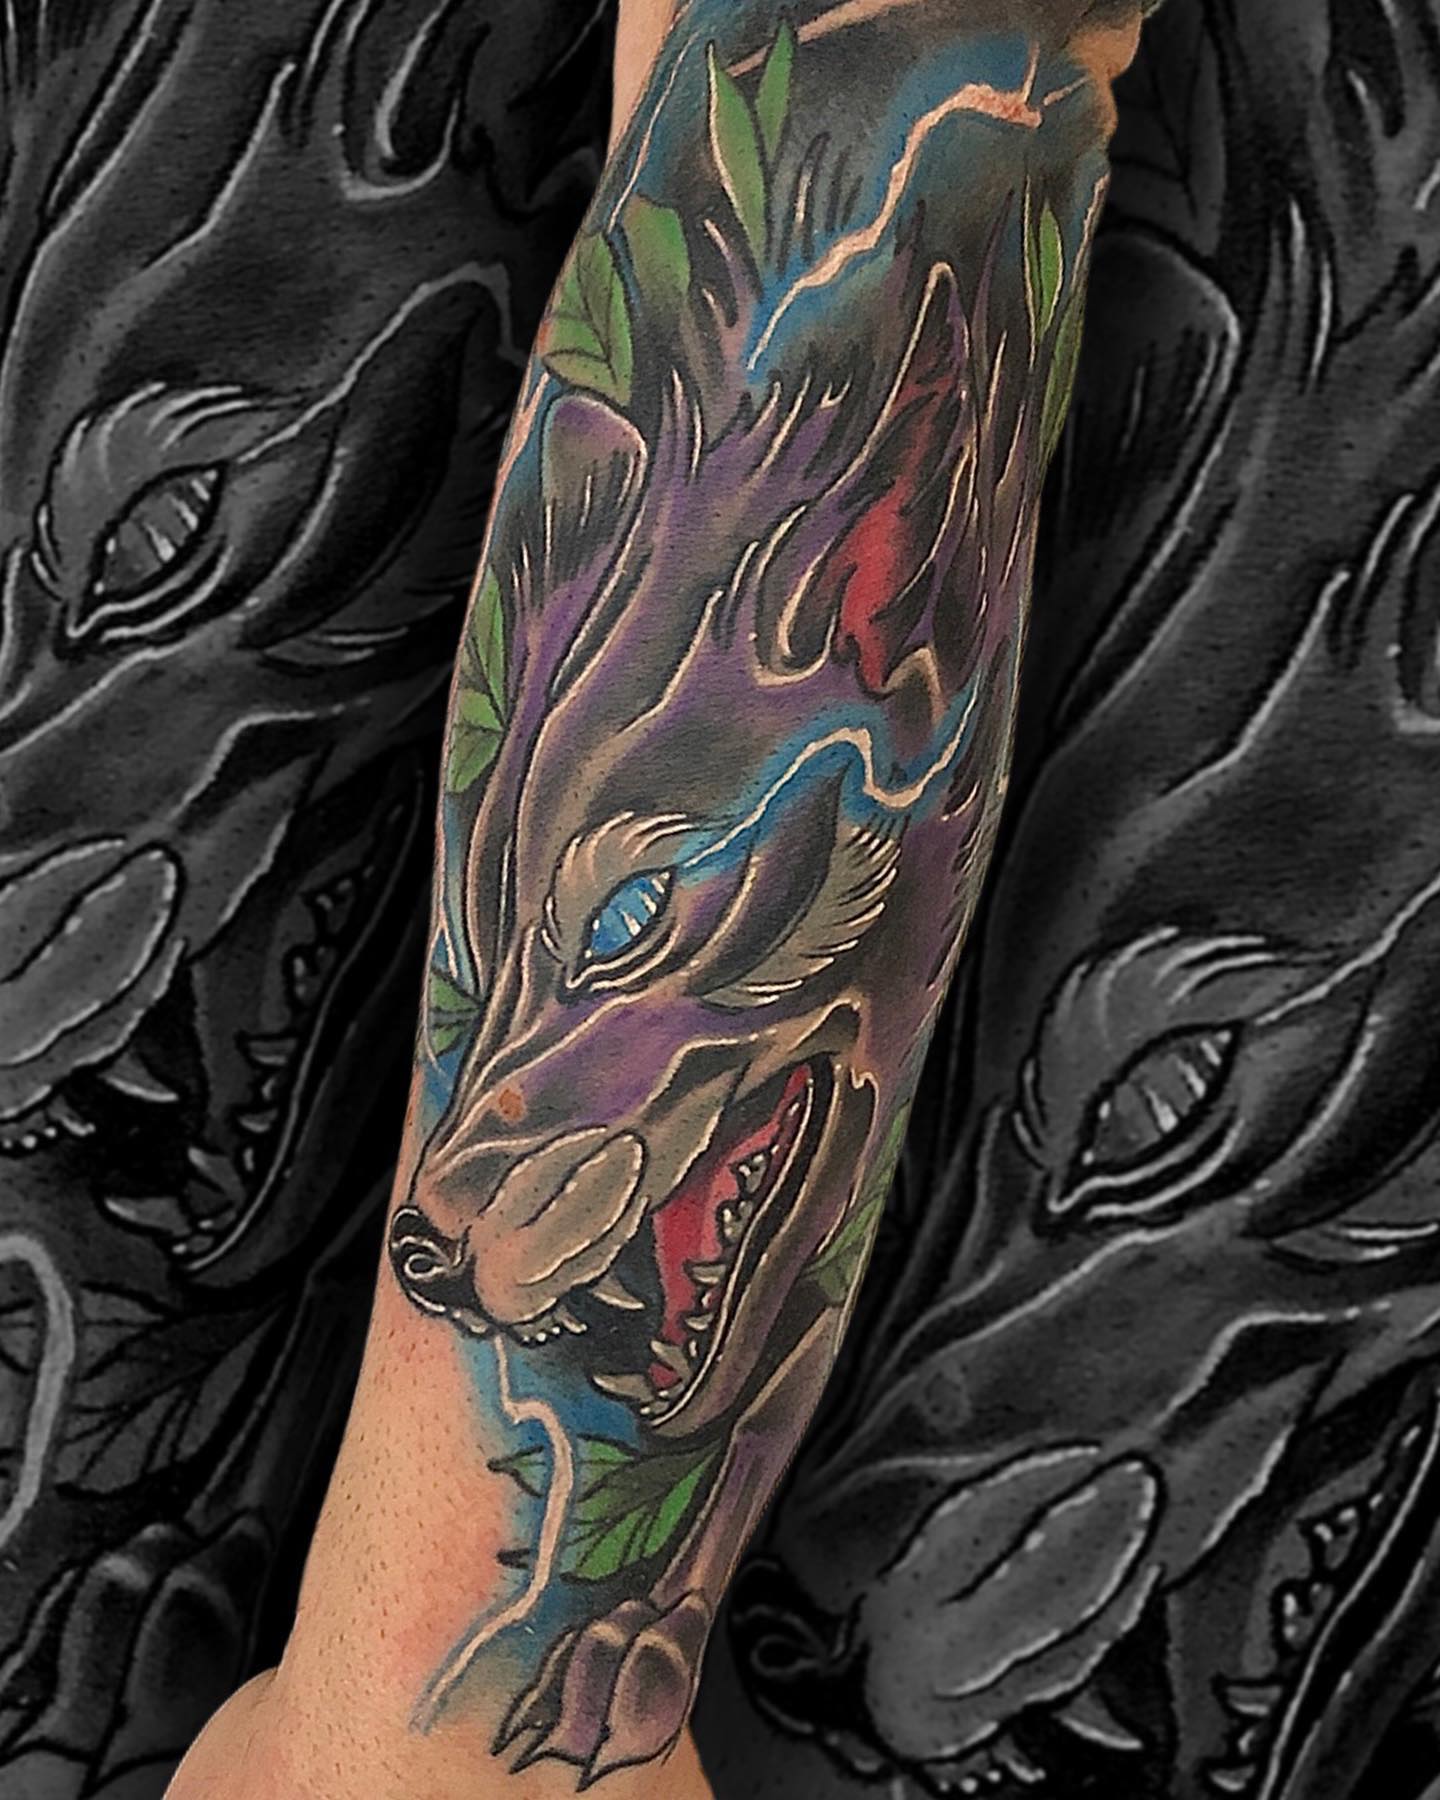 60+ Wolf Tattoos: The Wildest Ideas, Cool Designs and Meaning - 100 Tattoos